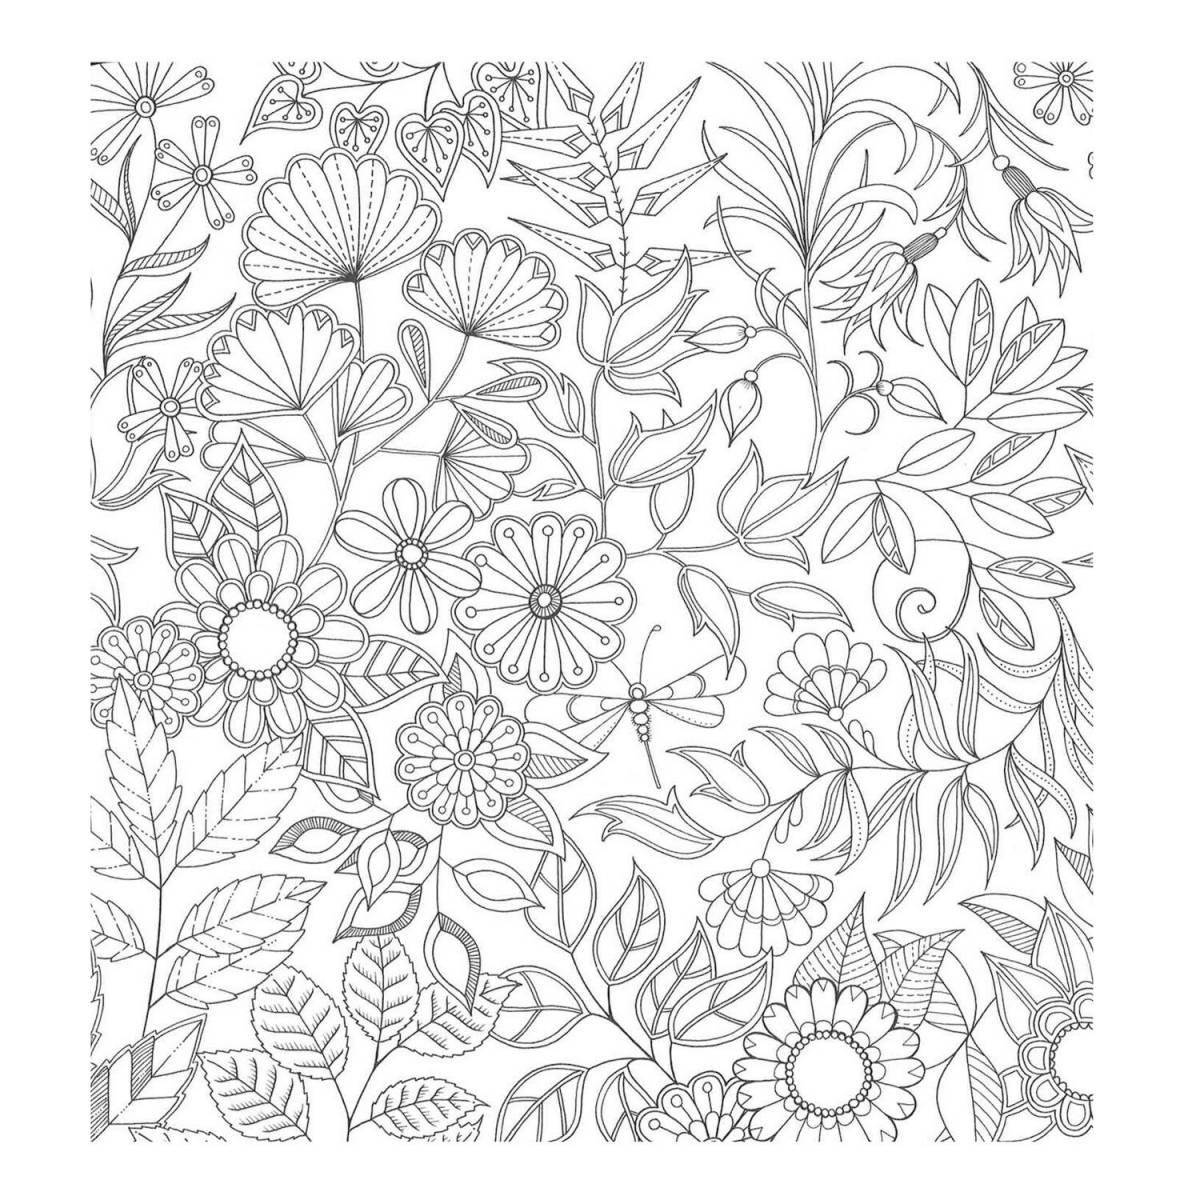 Inviting coloring book antistress mysterious forest